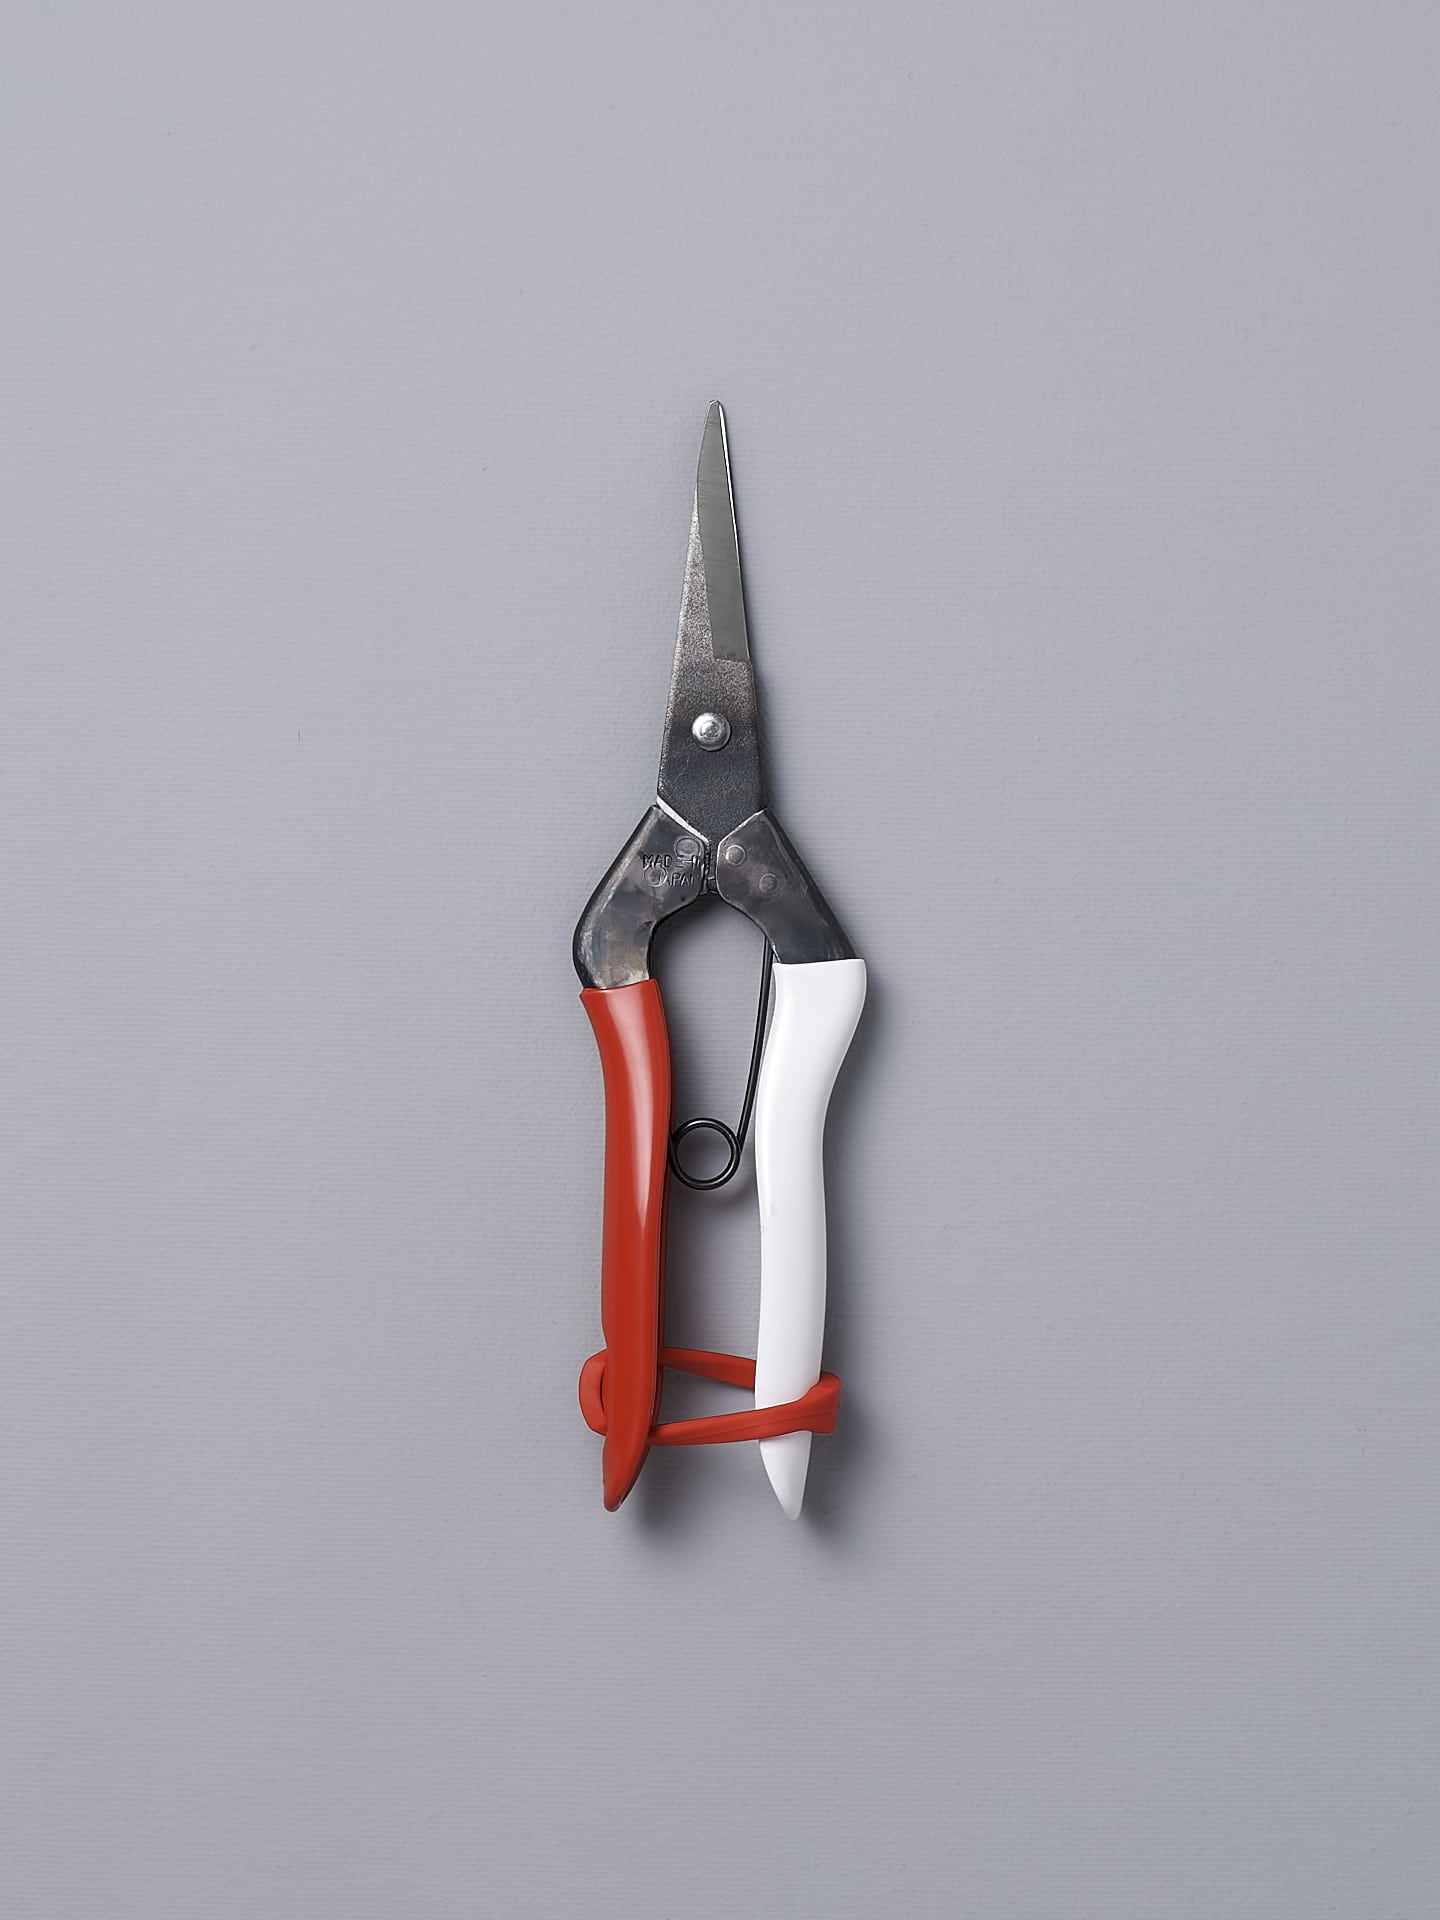 A pair of Okatsune Japanese Snips №304 on a gray background.